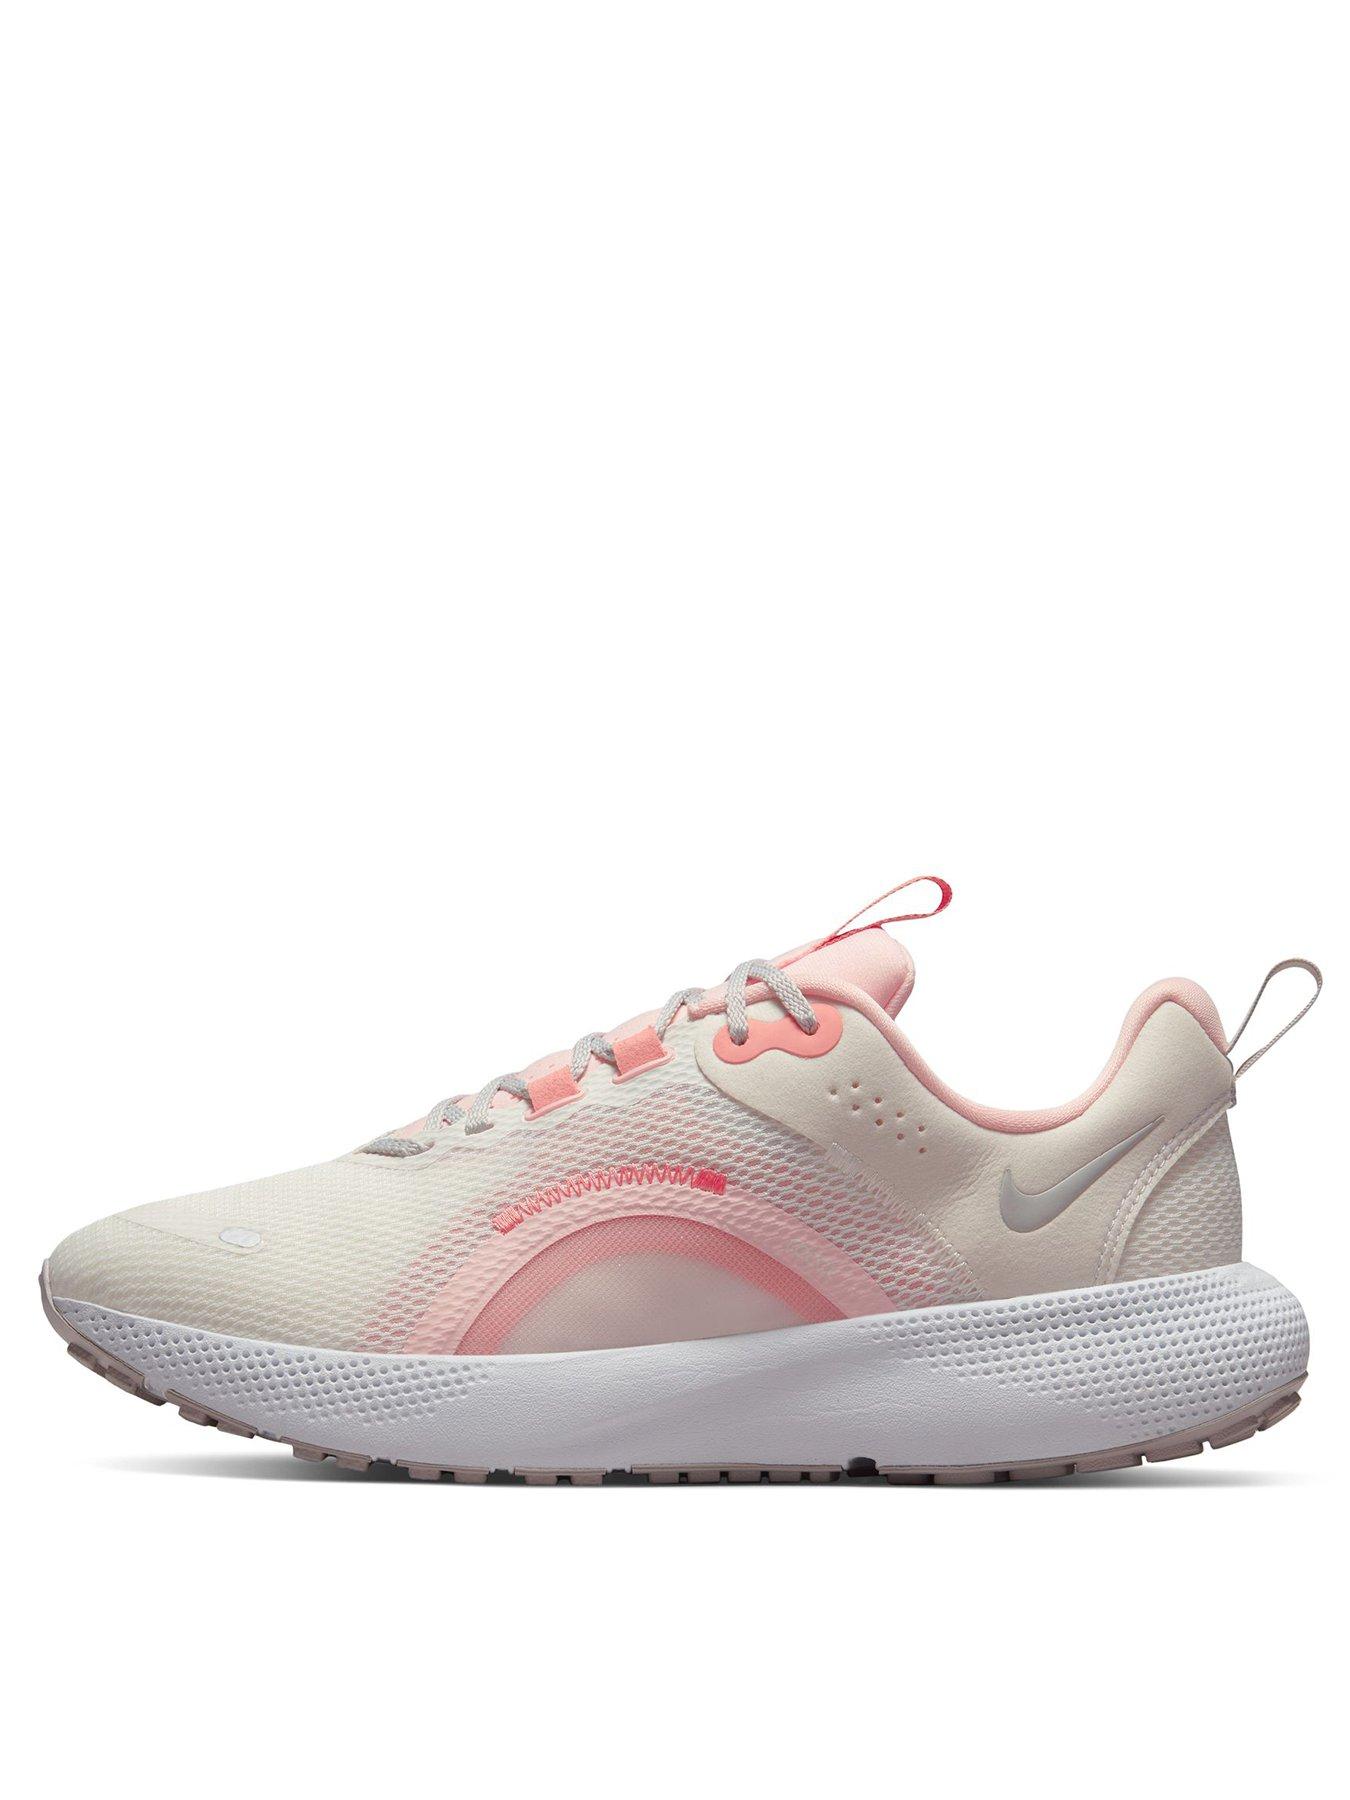 Nike Womens Escape Run 2 Running Trainers - Pink